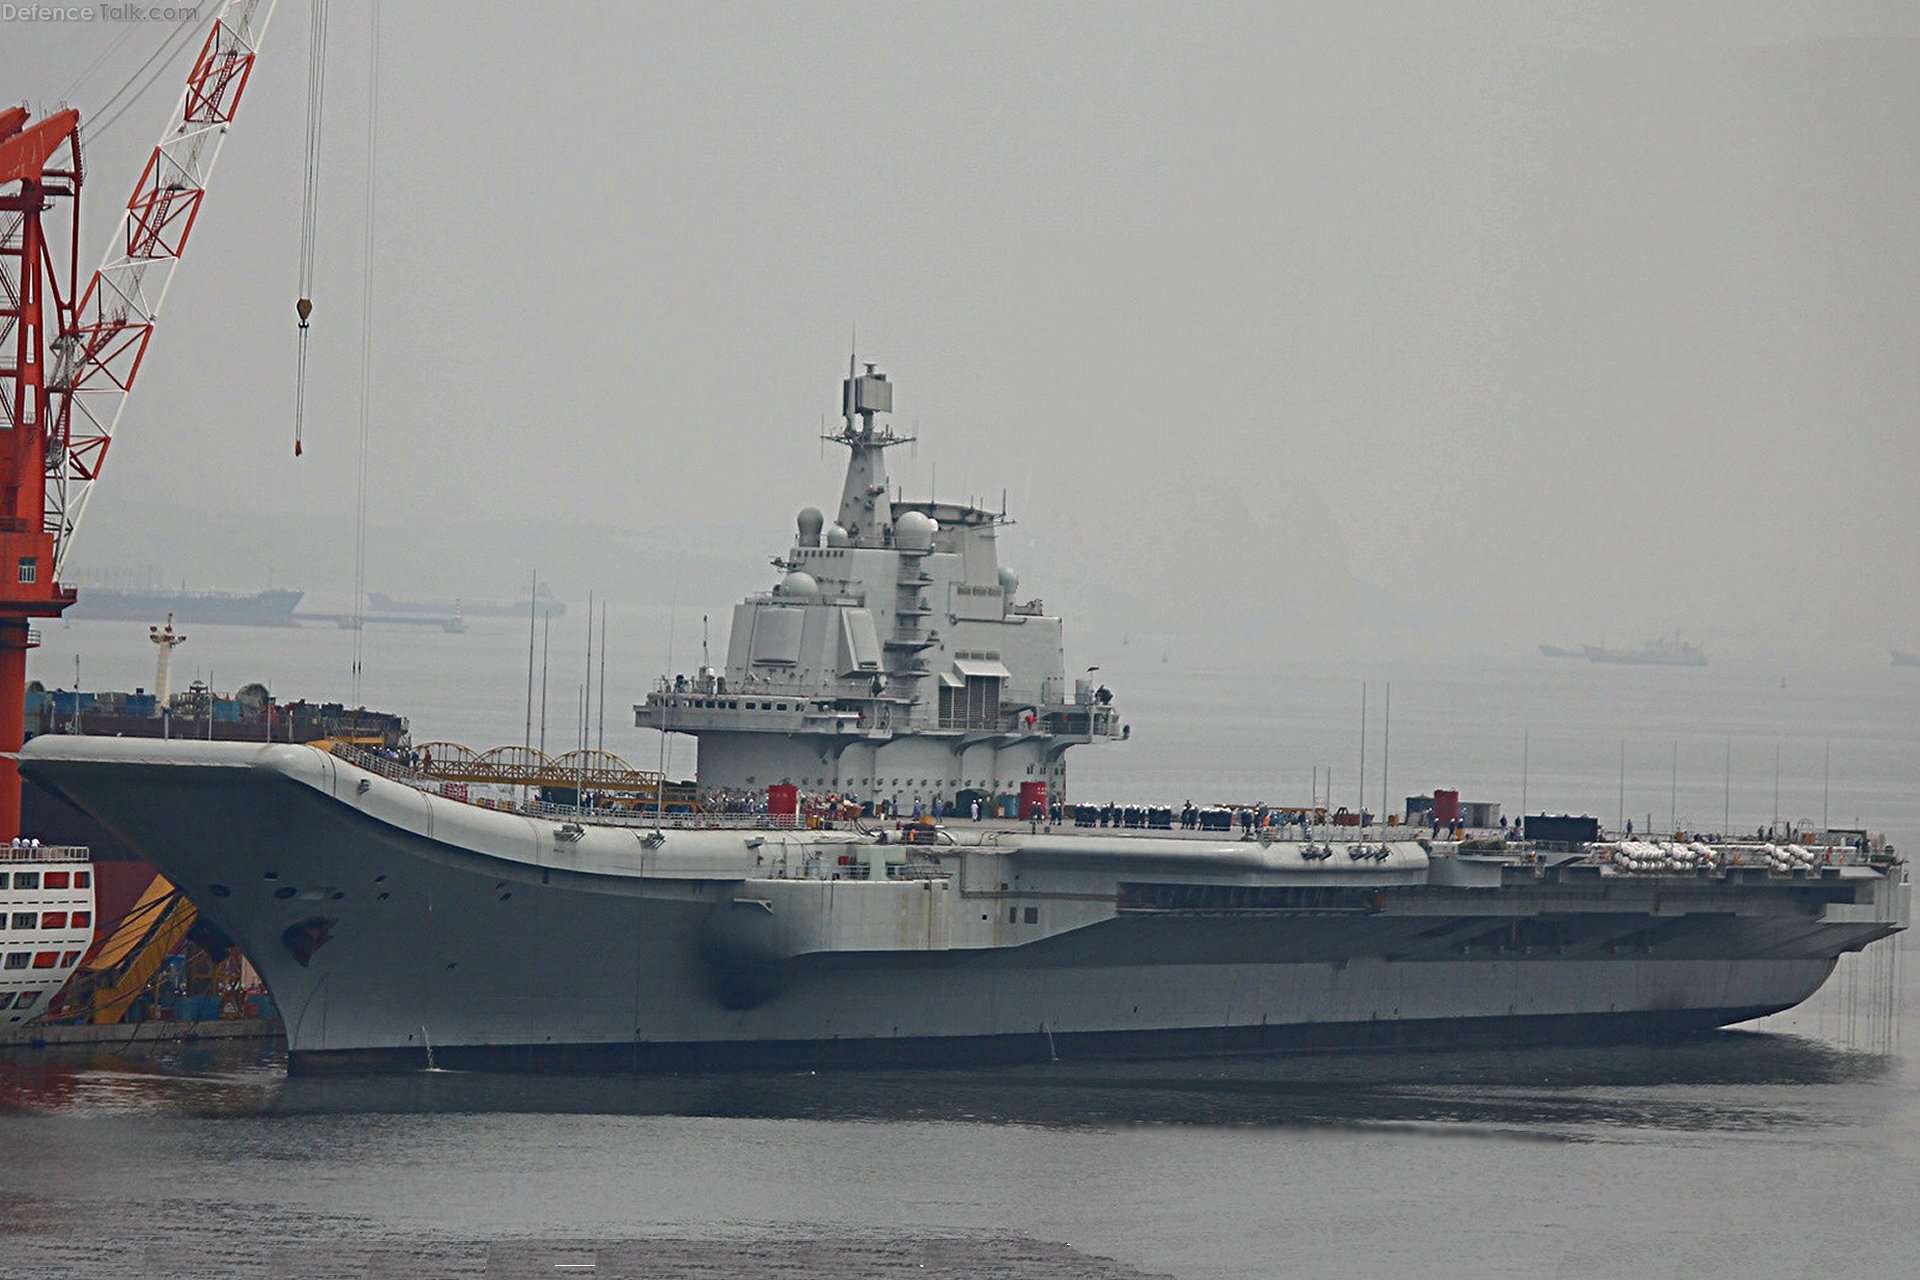 Chinese Aircraft Carrier from the port bow.